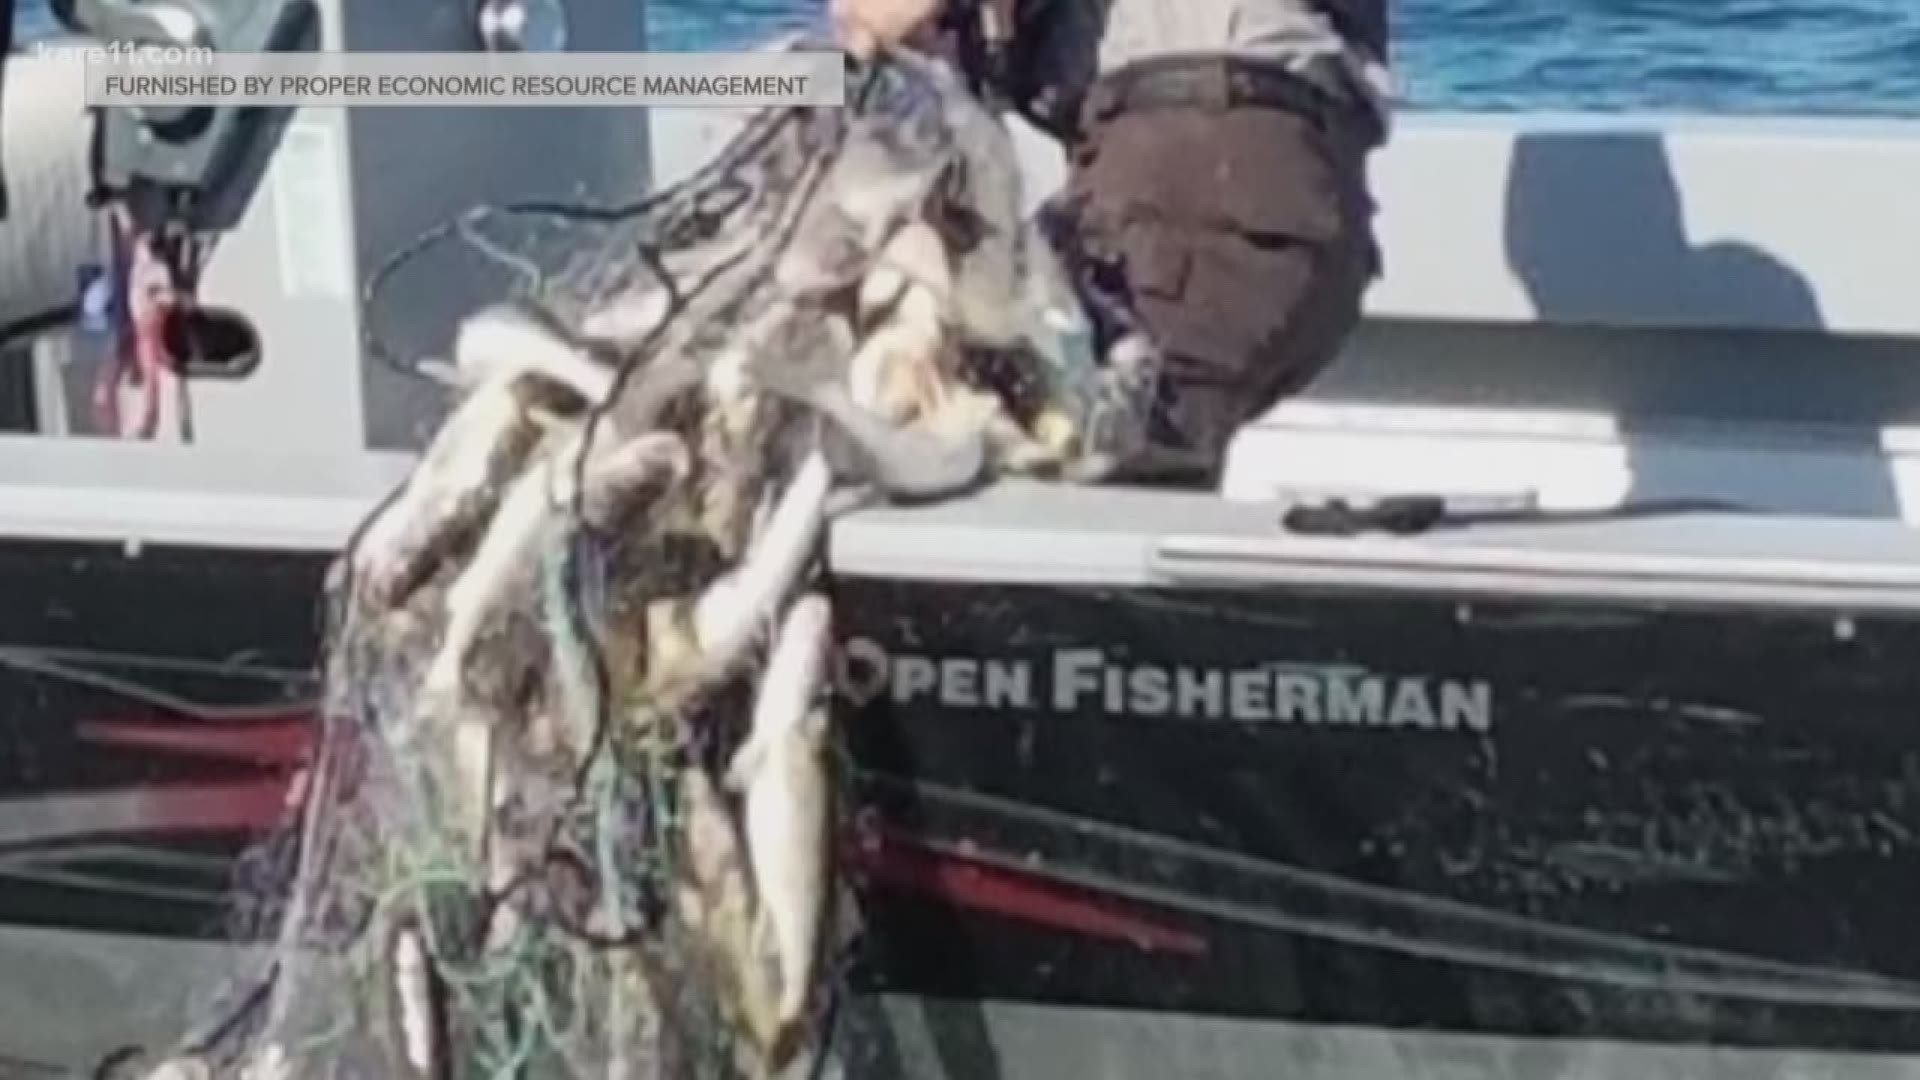 A photo showing an abandoned tribal gillnet with 67 dead walleye has inflamed tensions concerning the management of Lake Mille Lacs. https://kare11.tv/2Lx9EqK